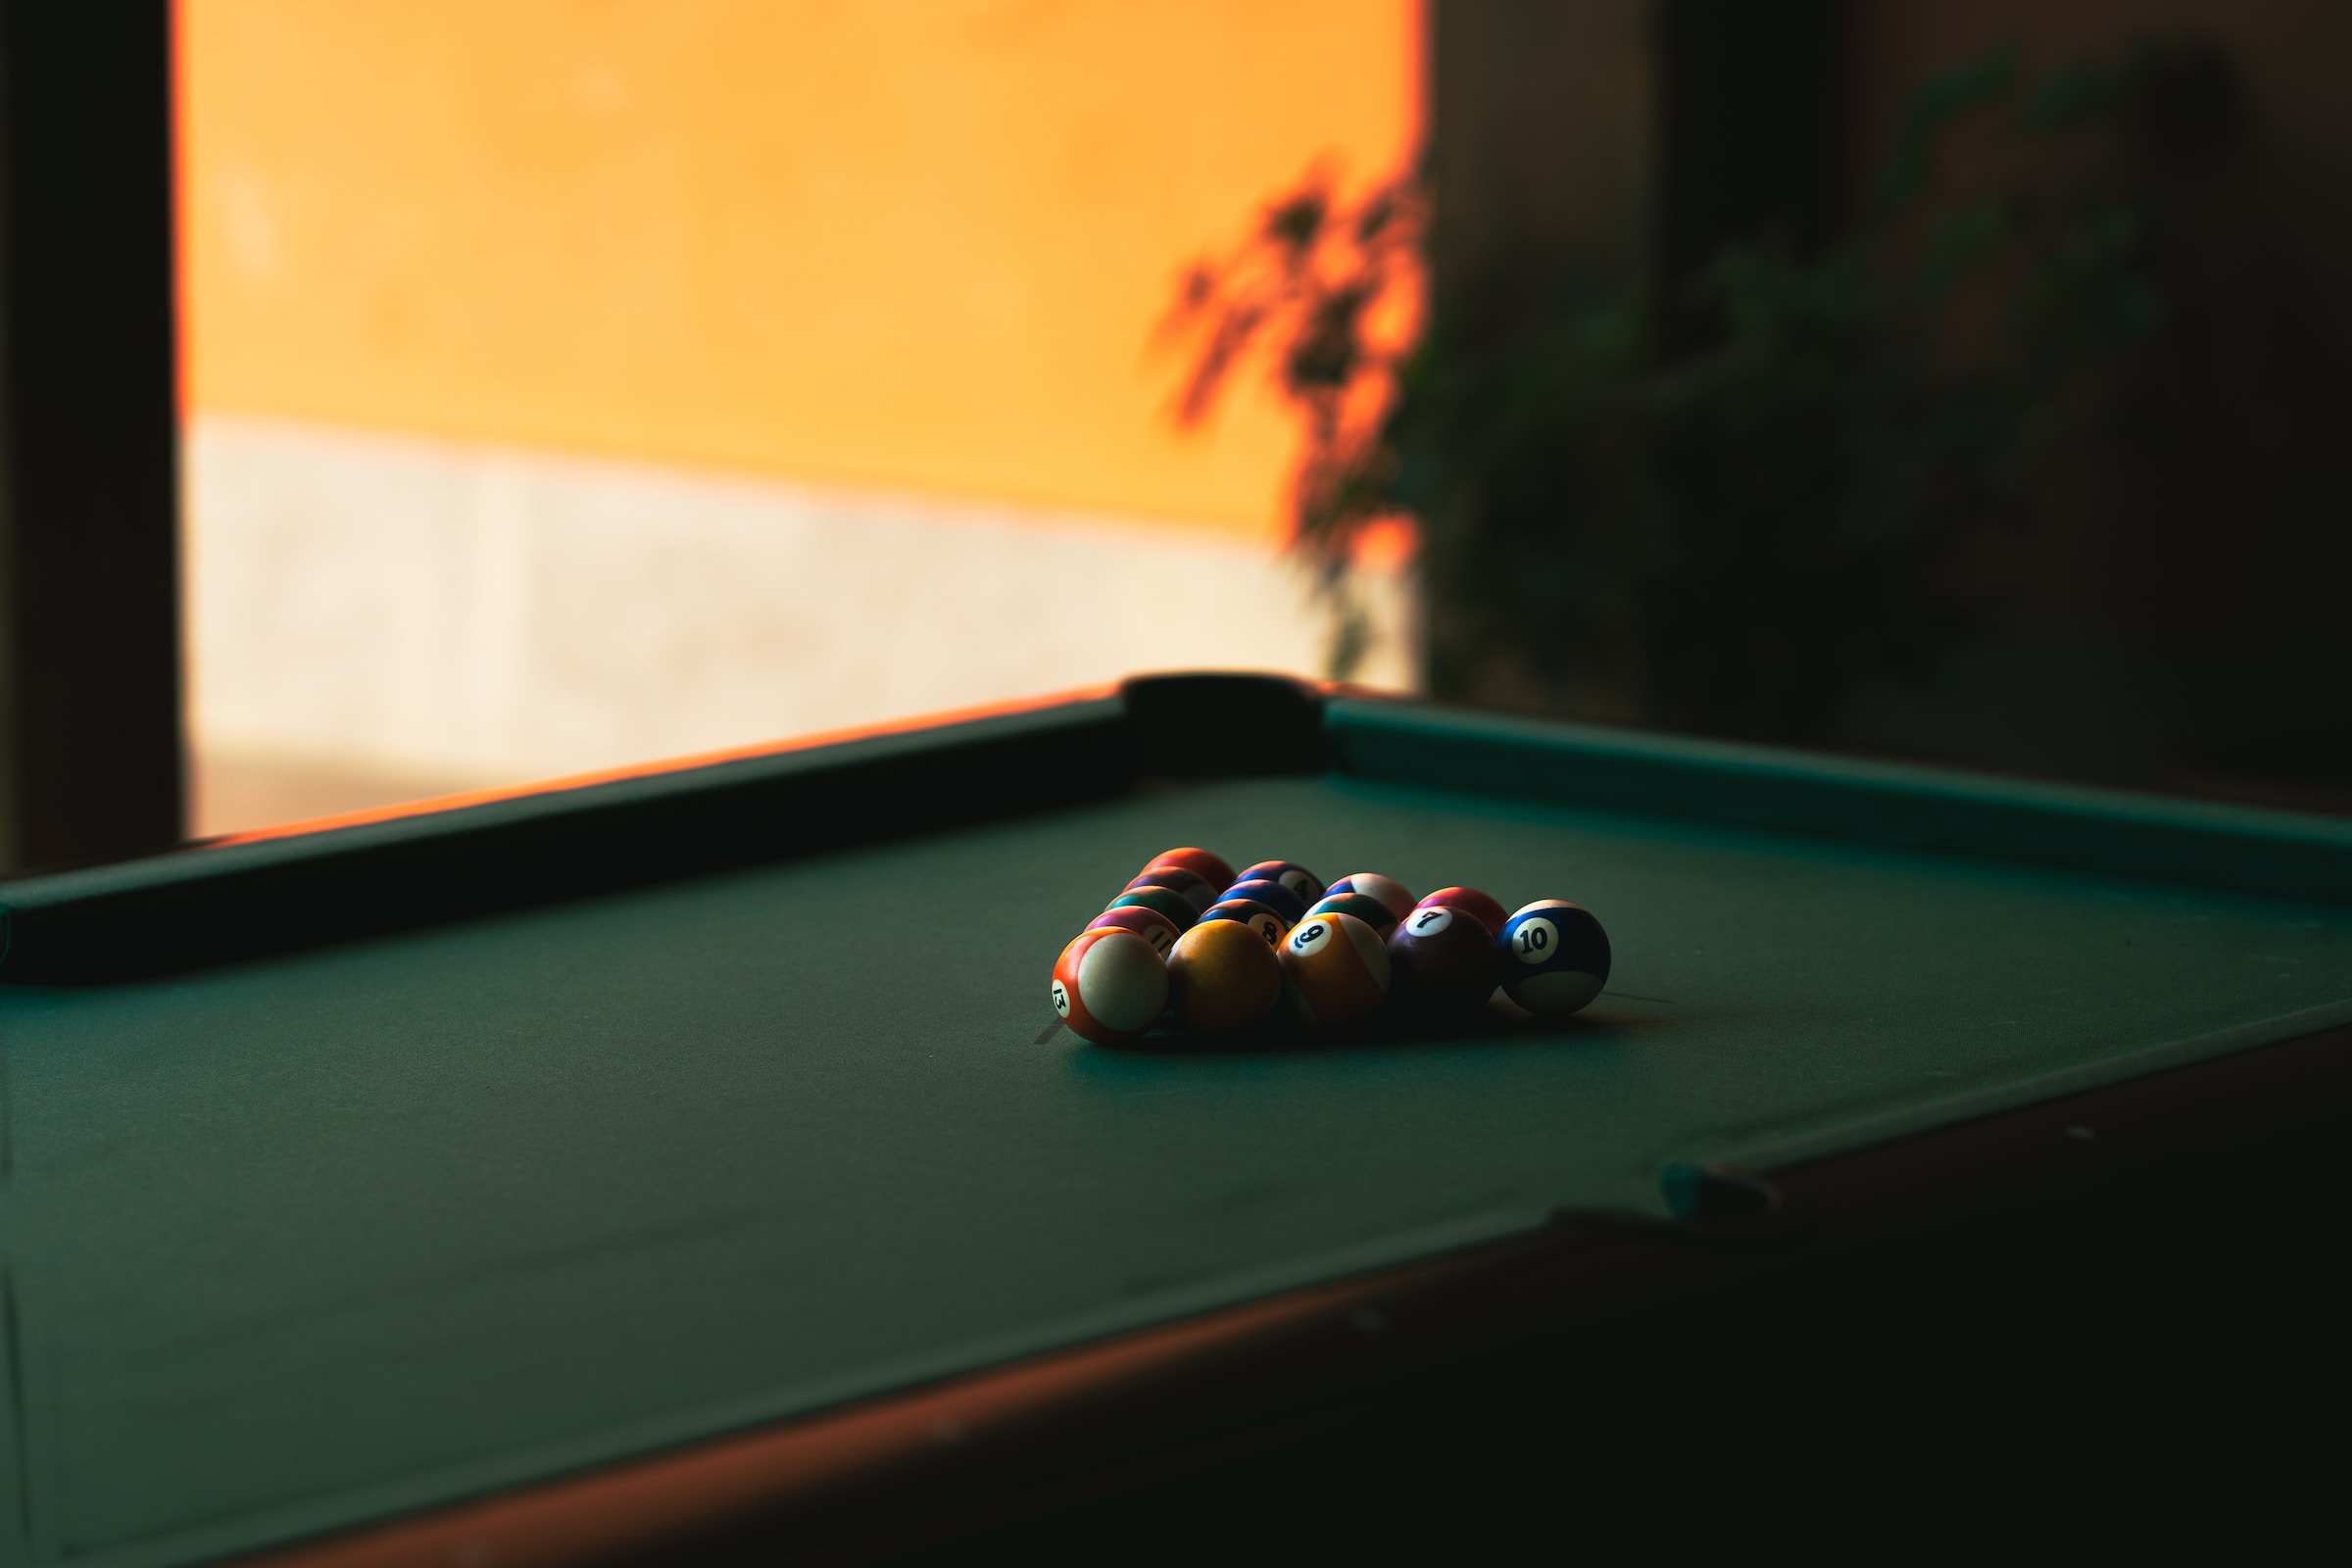 standard size pool table